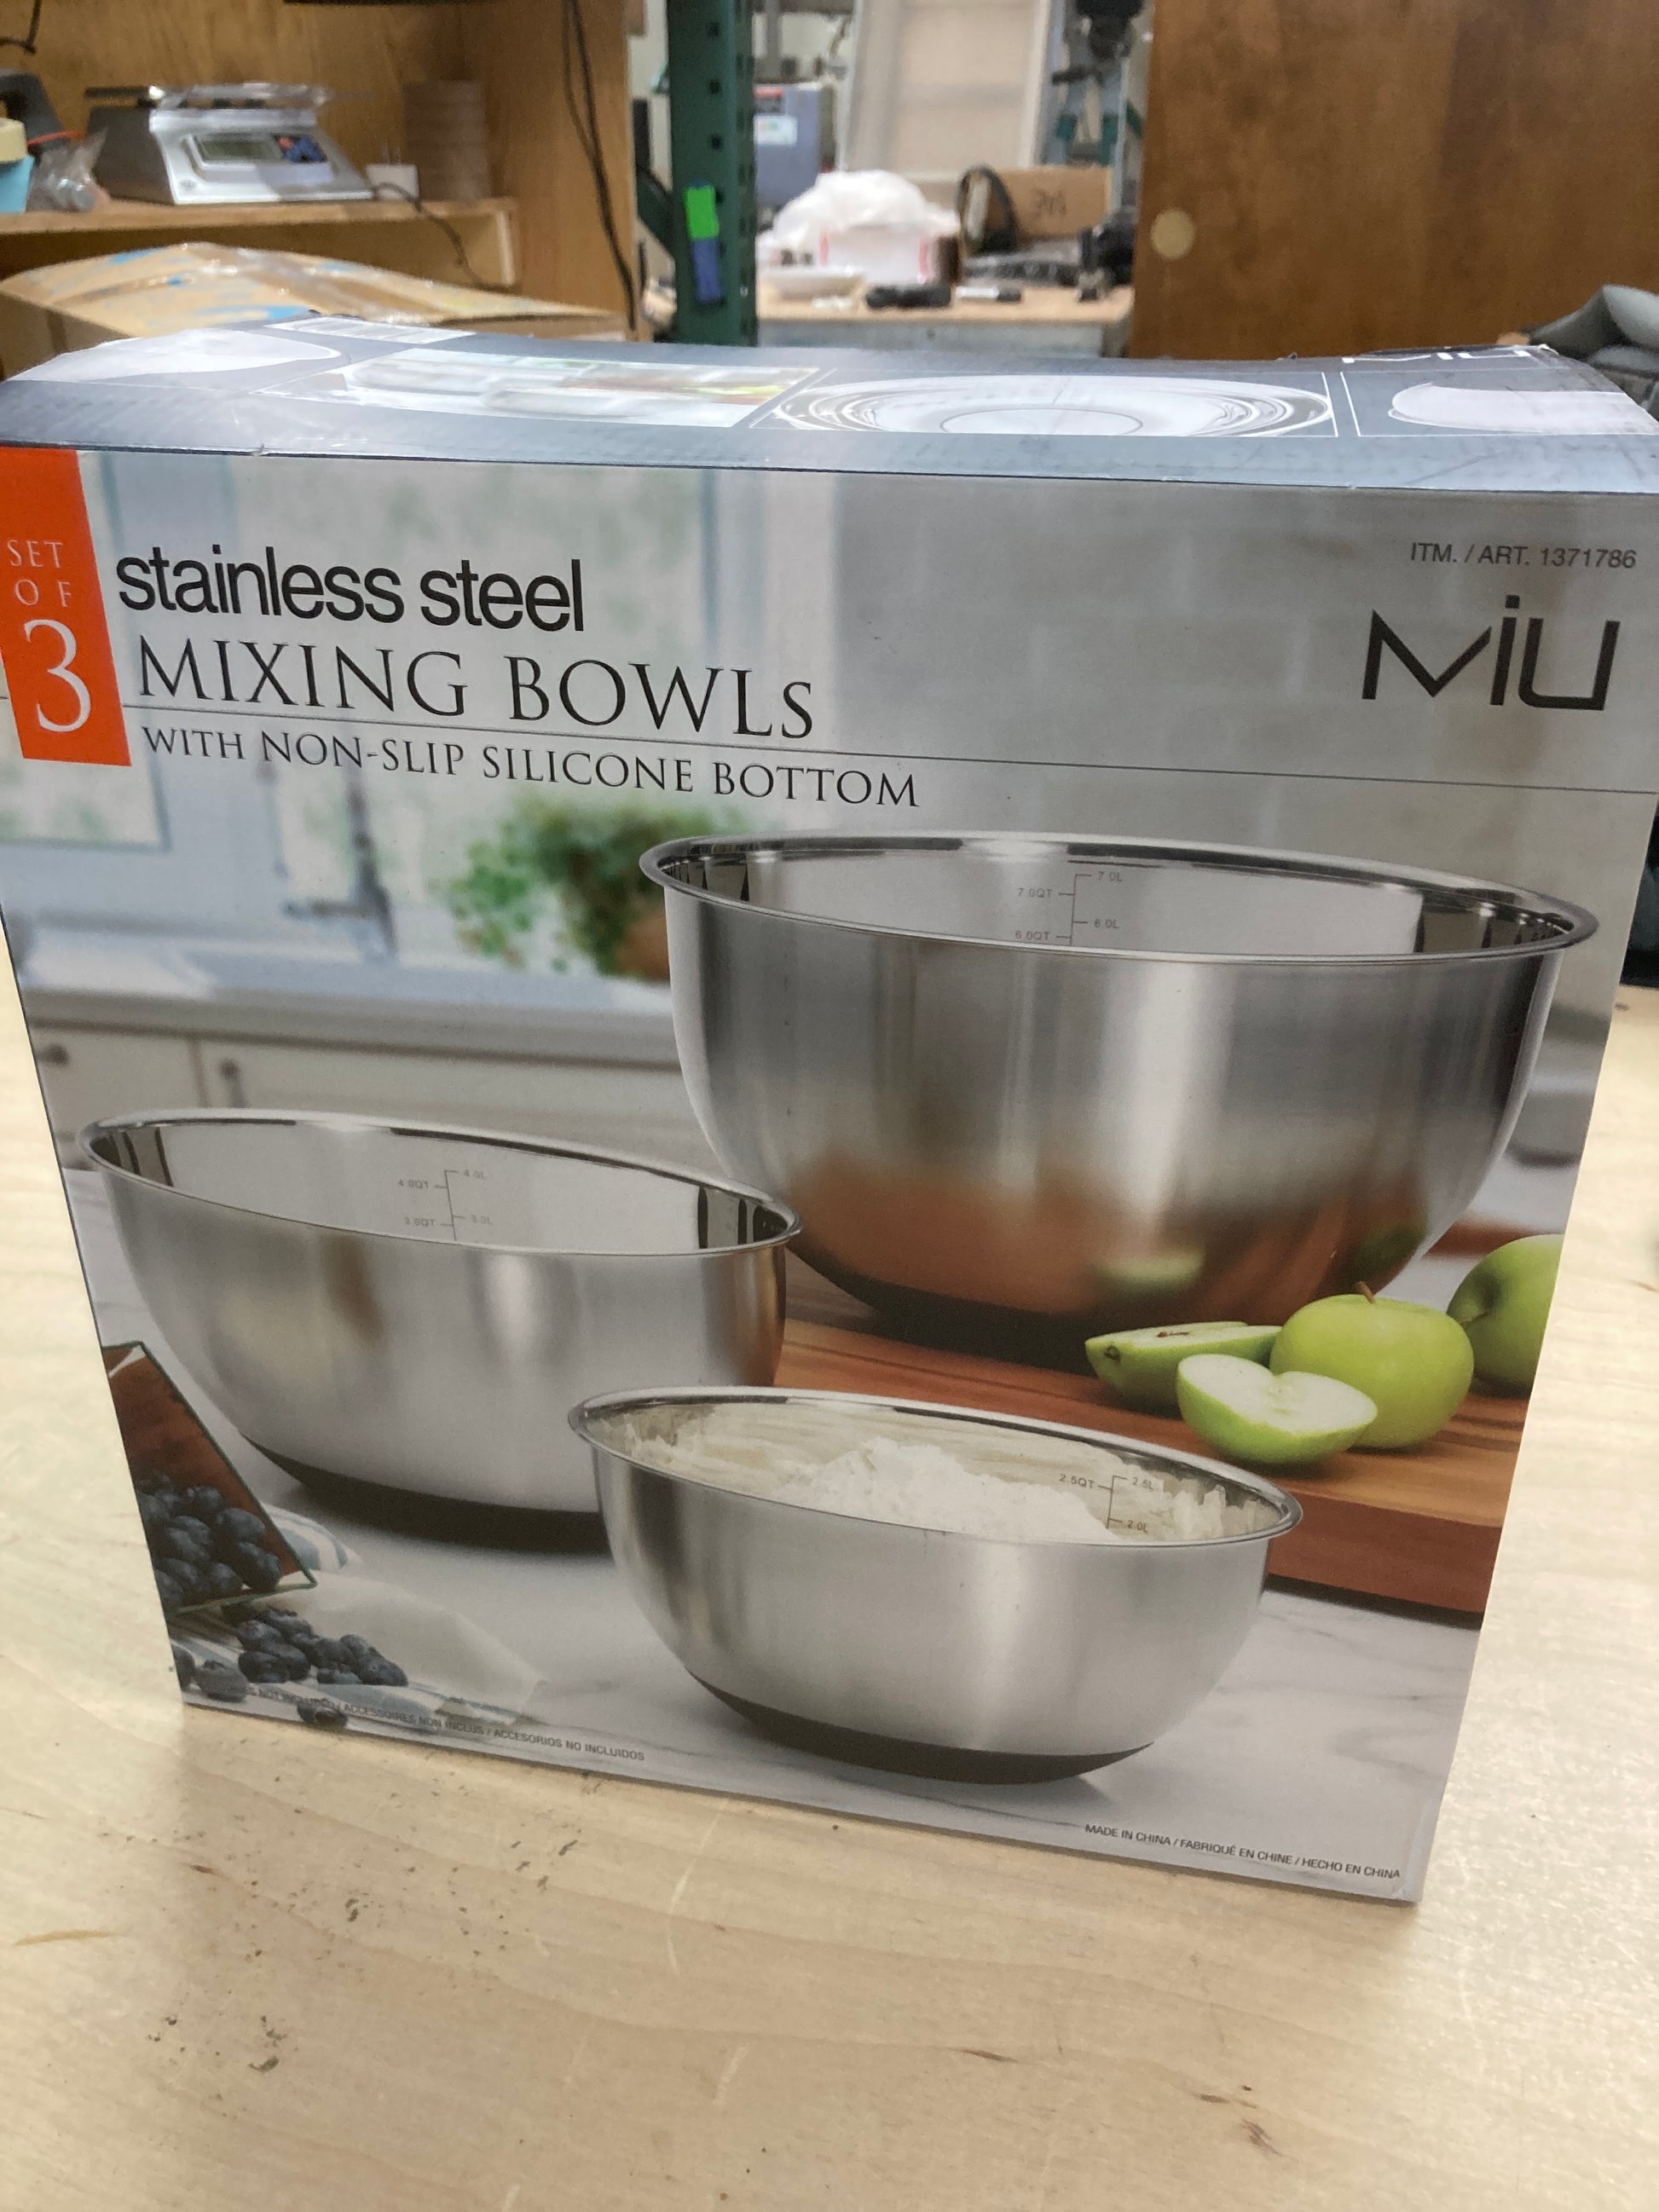 MIU Stainless Steel Mixing Bowls, Set of 3 - Retail $20 Default Title